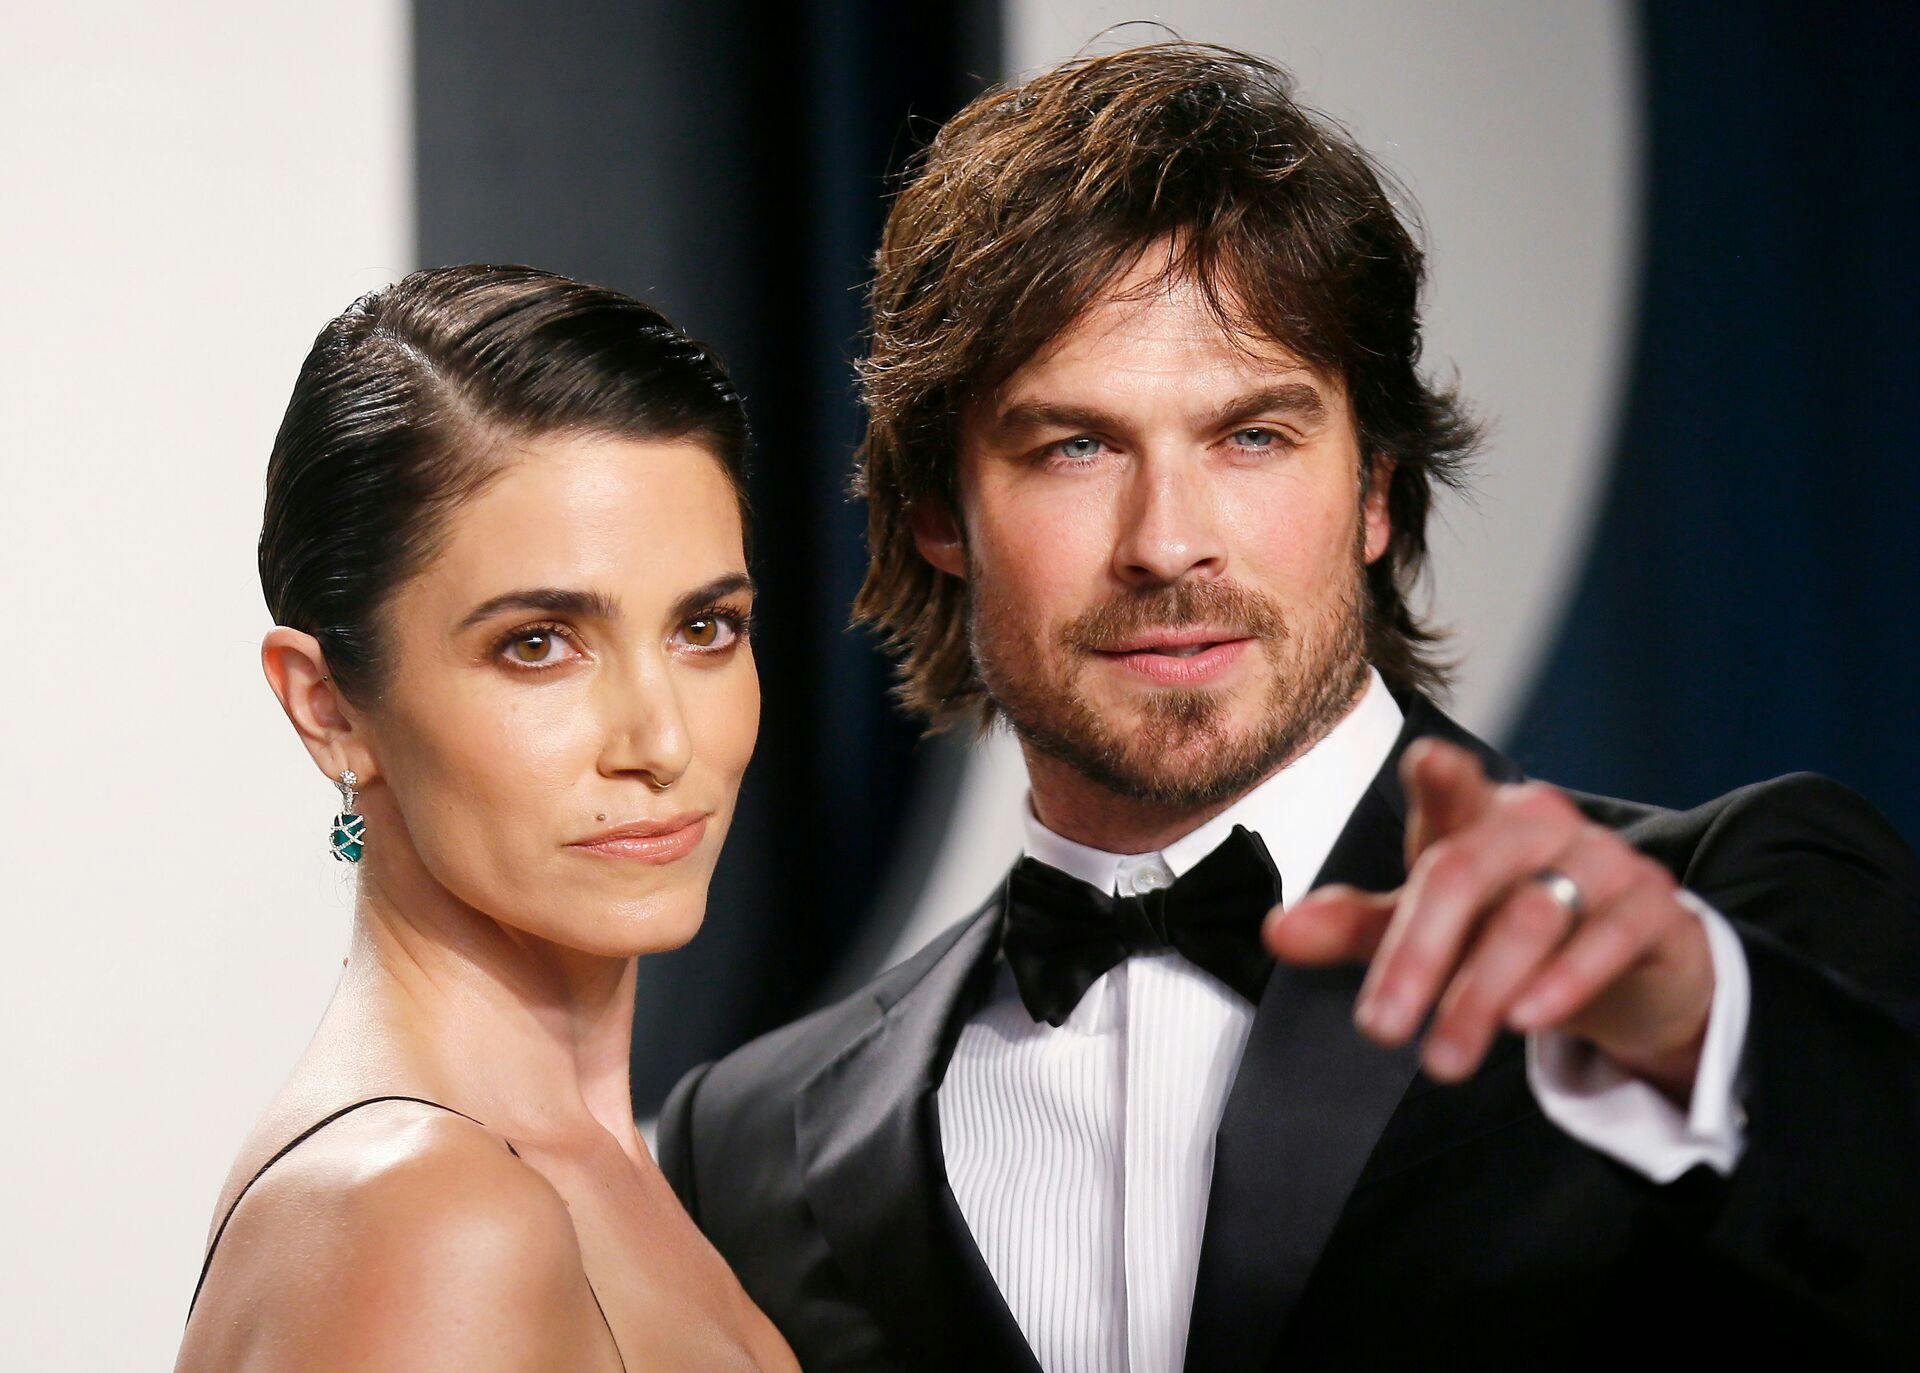 Nikki Reed and Ian Somerhalder attend the Vanity Fair Oscar party in Beverly Hills during the 92nd Academy Awards, in Los Angeles, California, U.S., February 9, 2020. REUTERS/Danny Moloshok